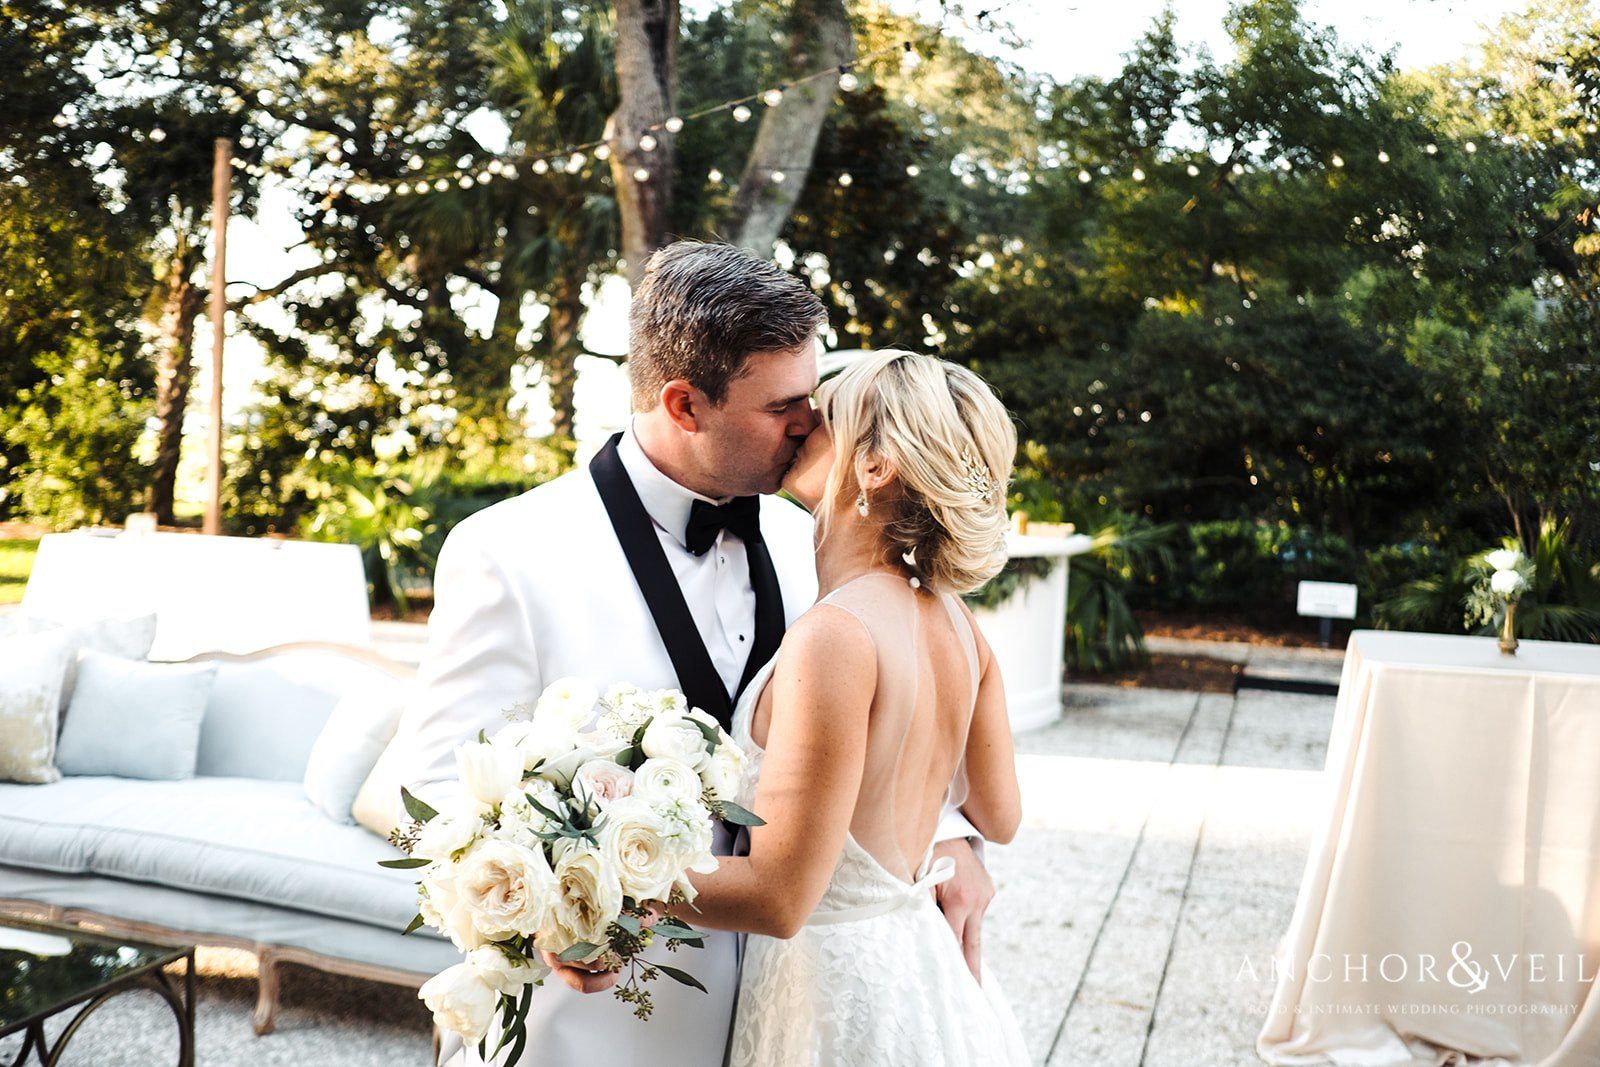 A special kiss before the reception at the Lowndes Grove Plantation Wedding